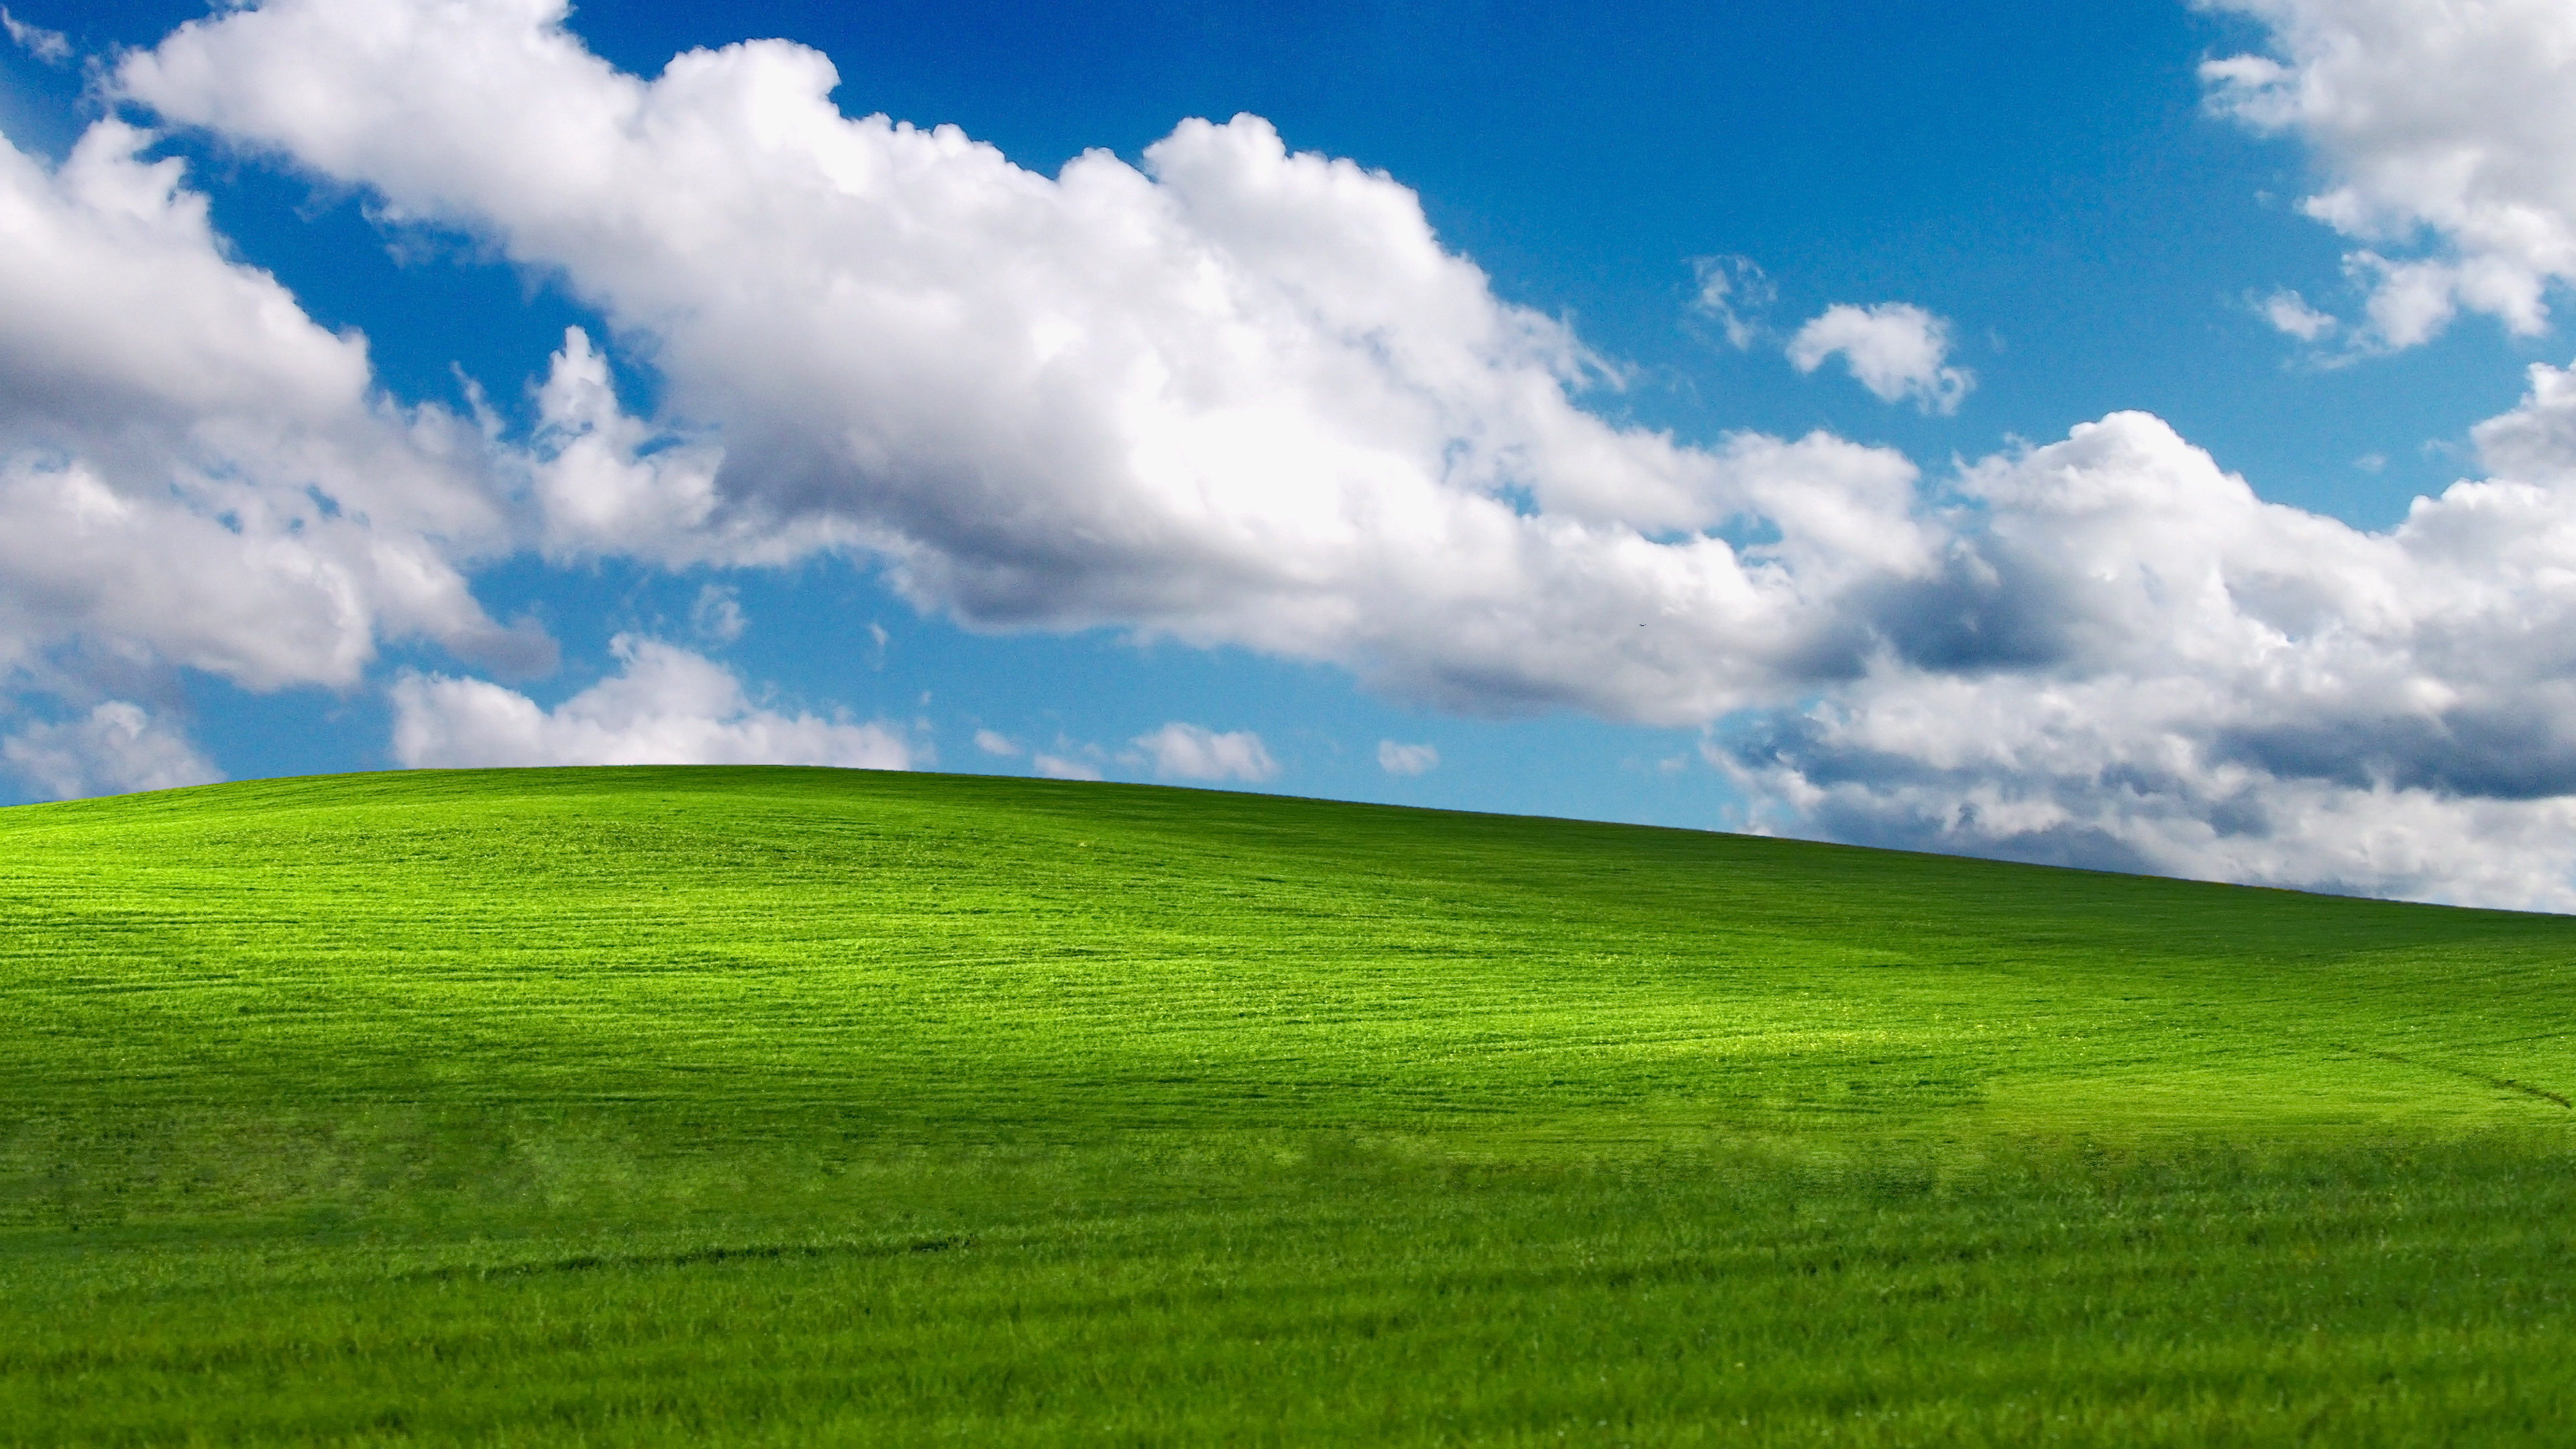 3840x2160 Free Windows Xp Wallpaper Collection of Windows Xp Backgrounds